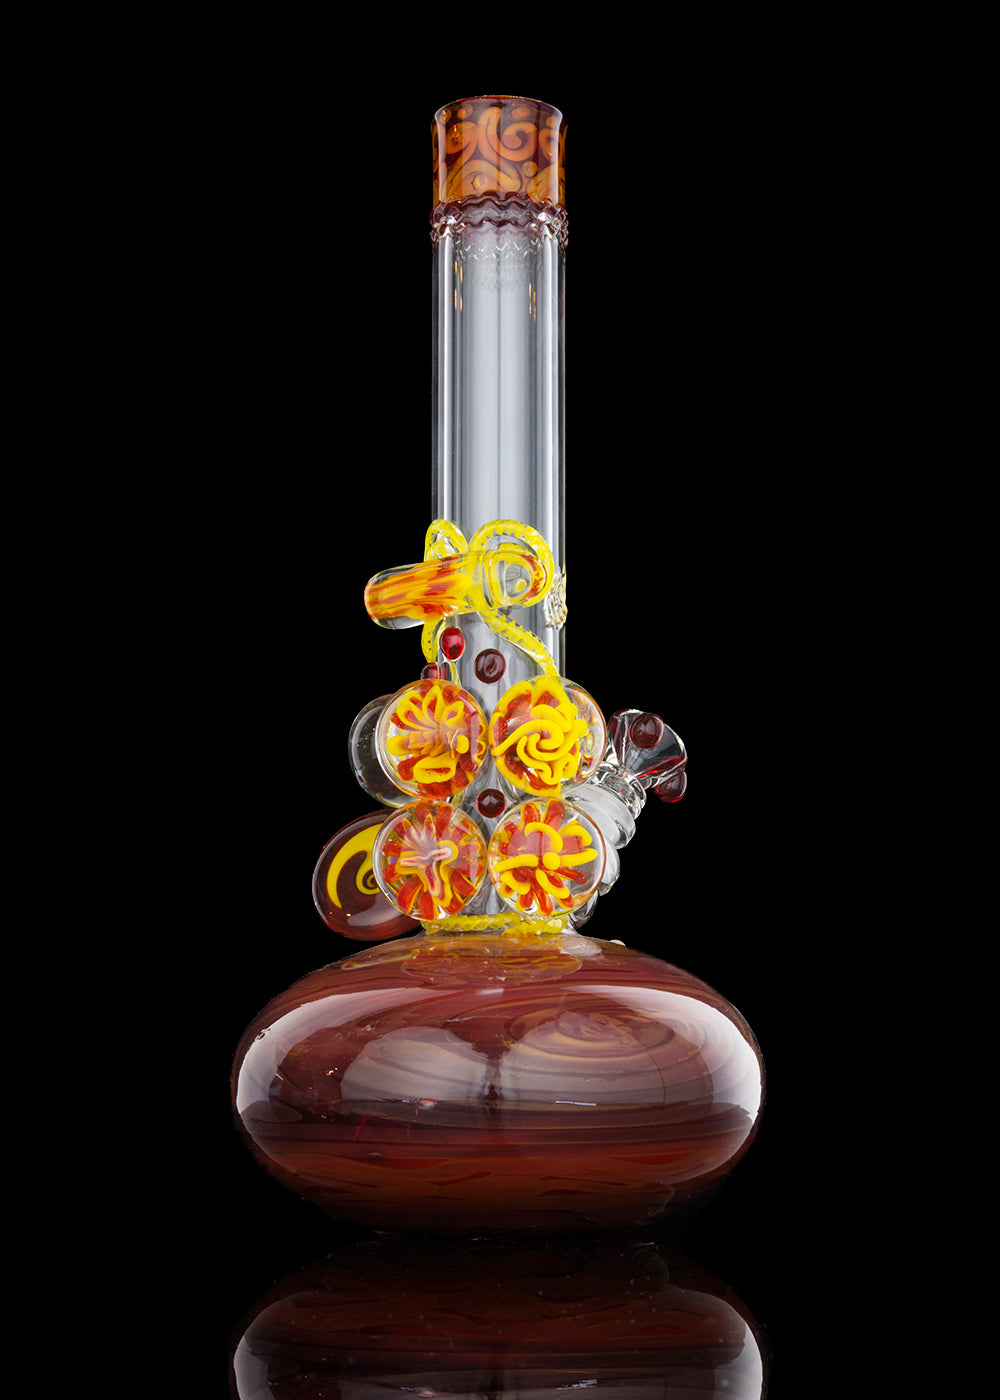 HVY Mini Atlas 38mm Ruby Coiled with 7 Marbles Tube